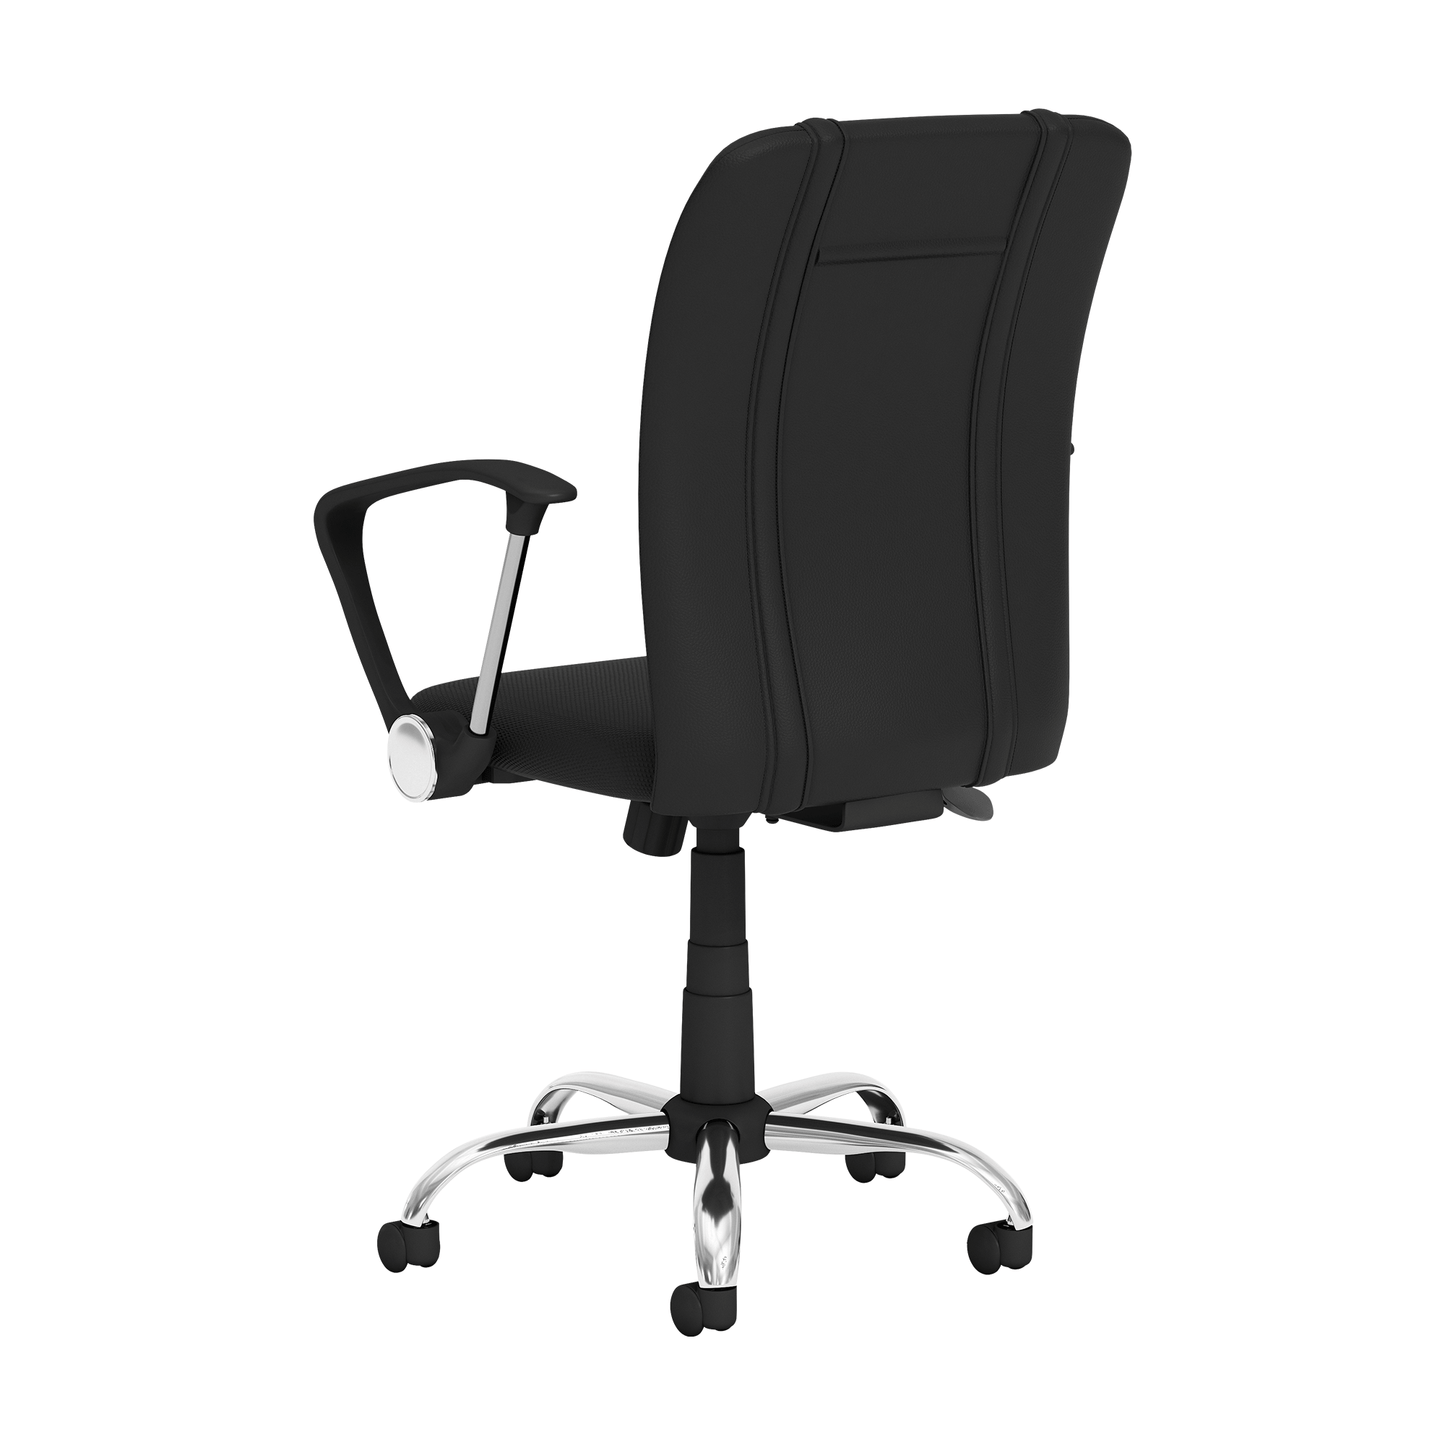 Curve Task Chair with New Orleans Pelicans 2024 Playoffs Logo